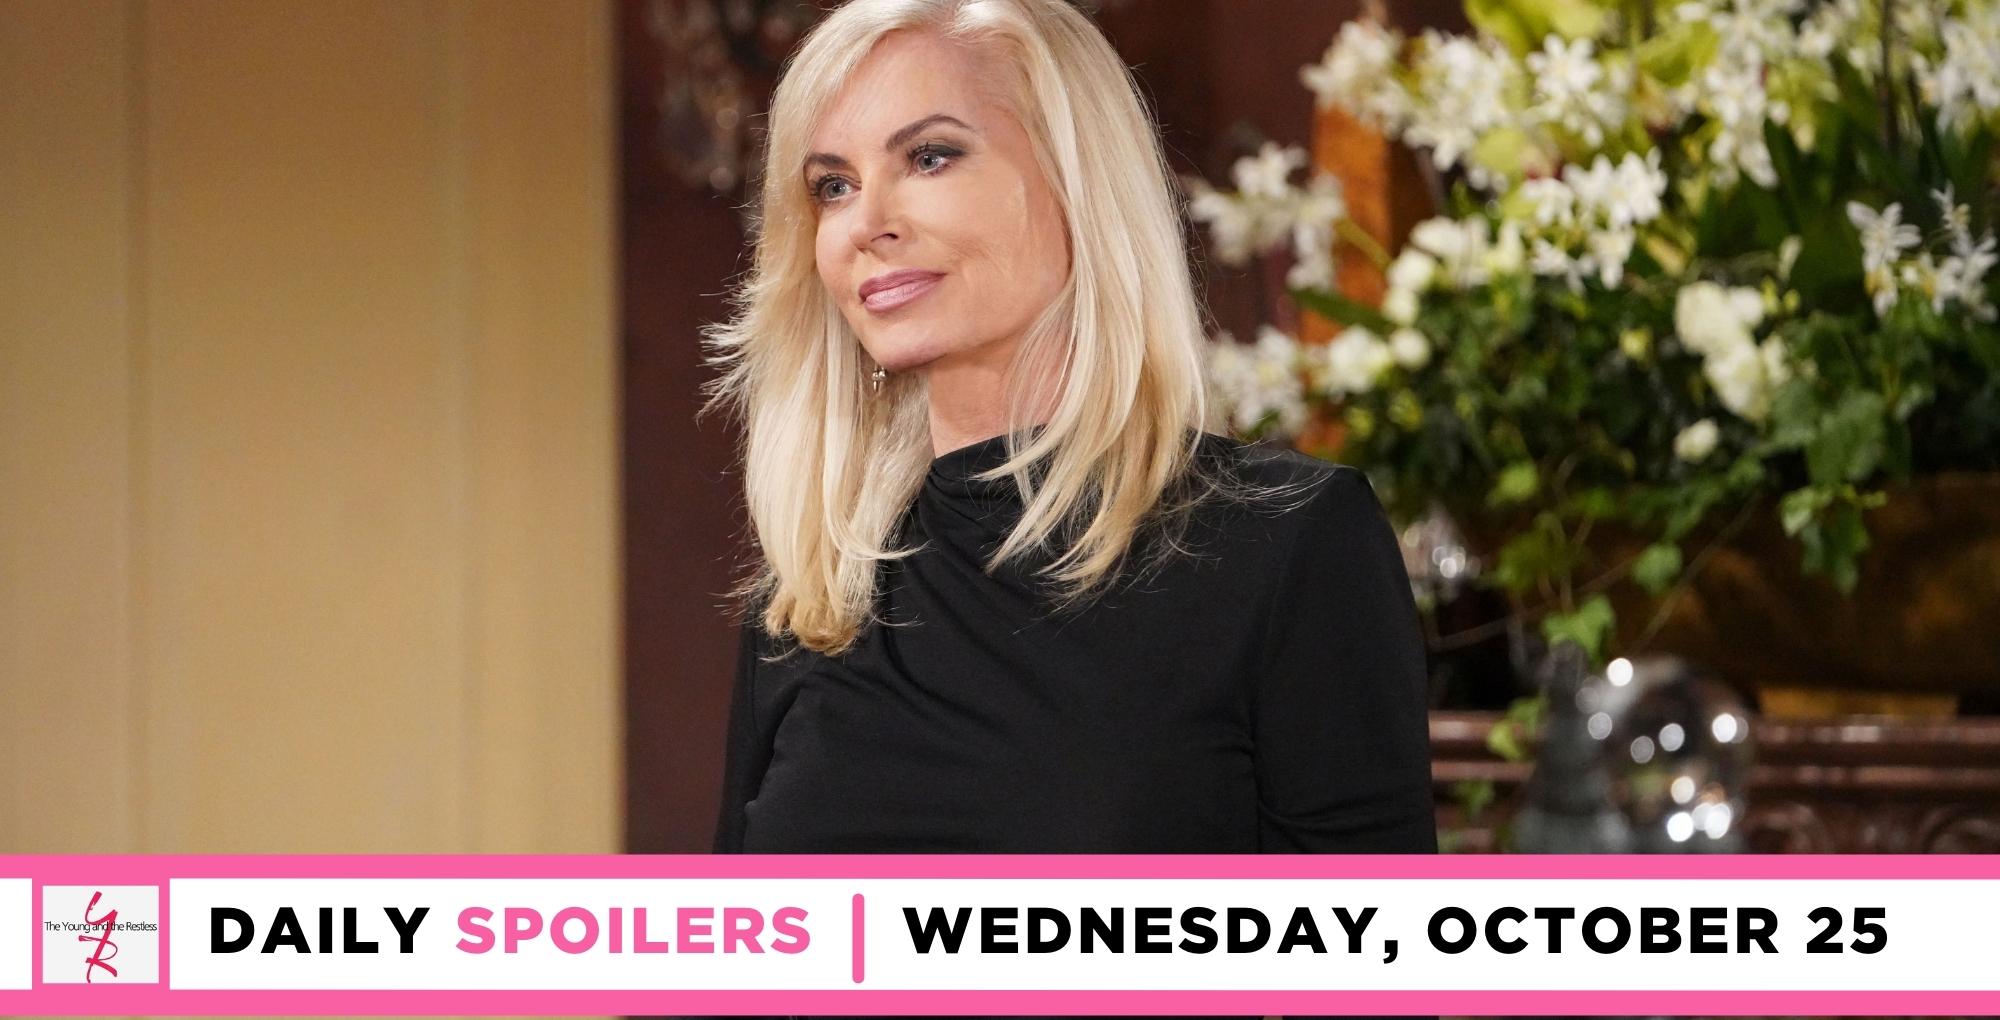 the young and the restless spoilers for october 25, 2023, episode #12732, has ashley abbott back in town.